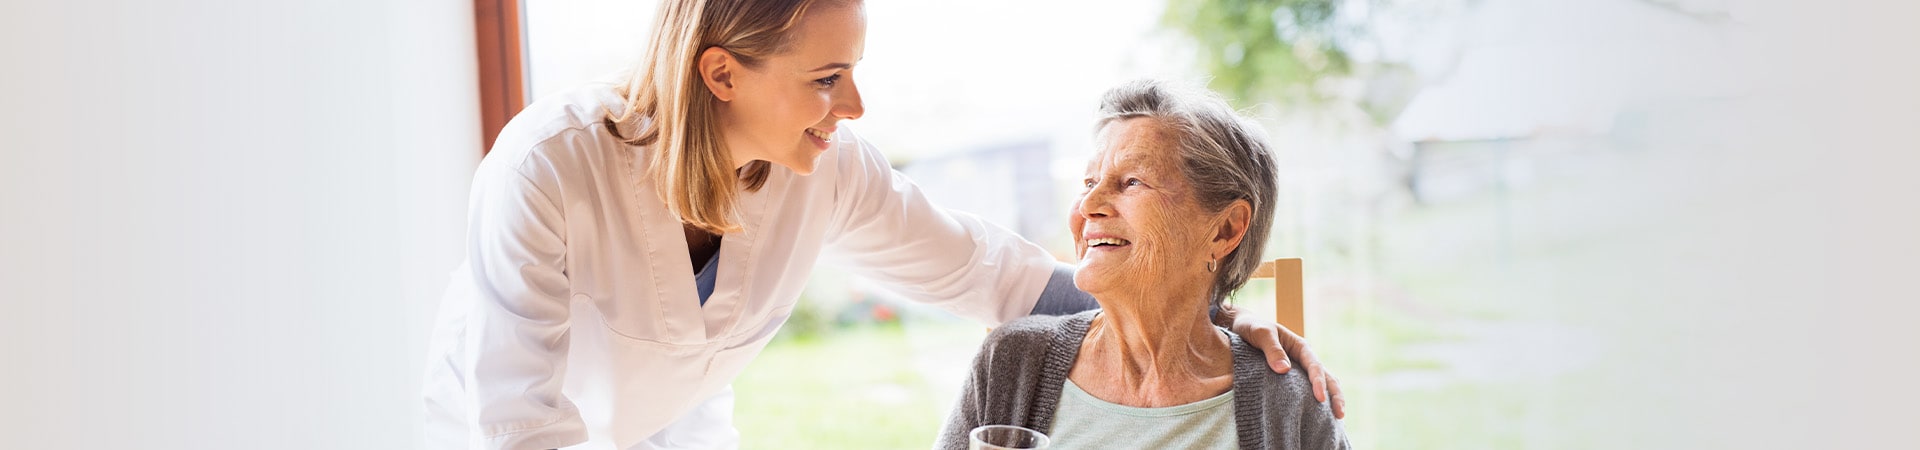 Caregiver and senior at home smiling with breakfast